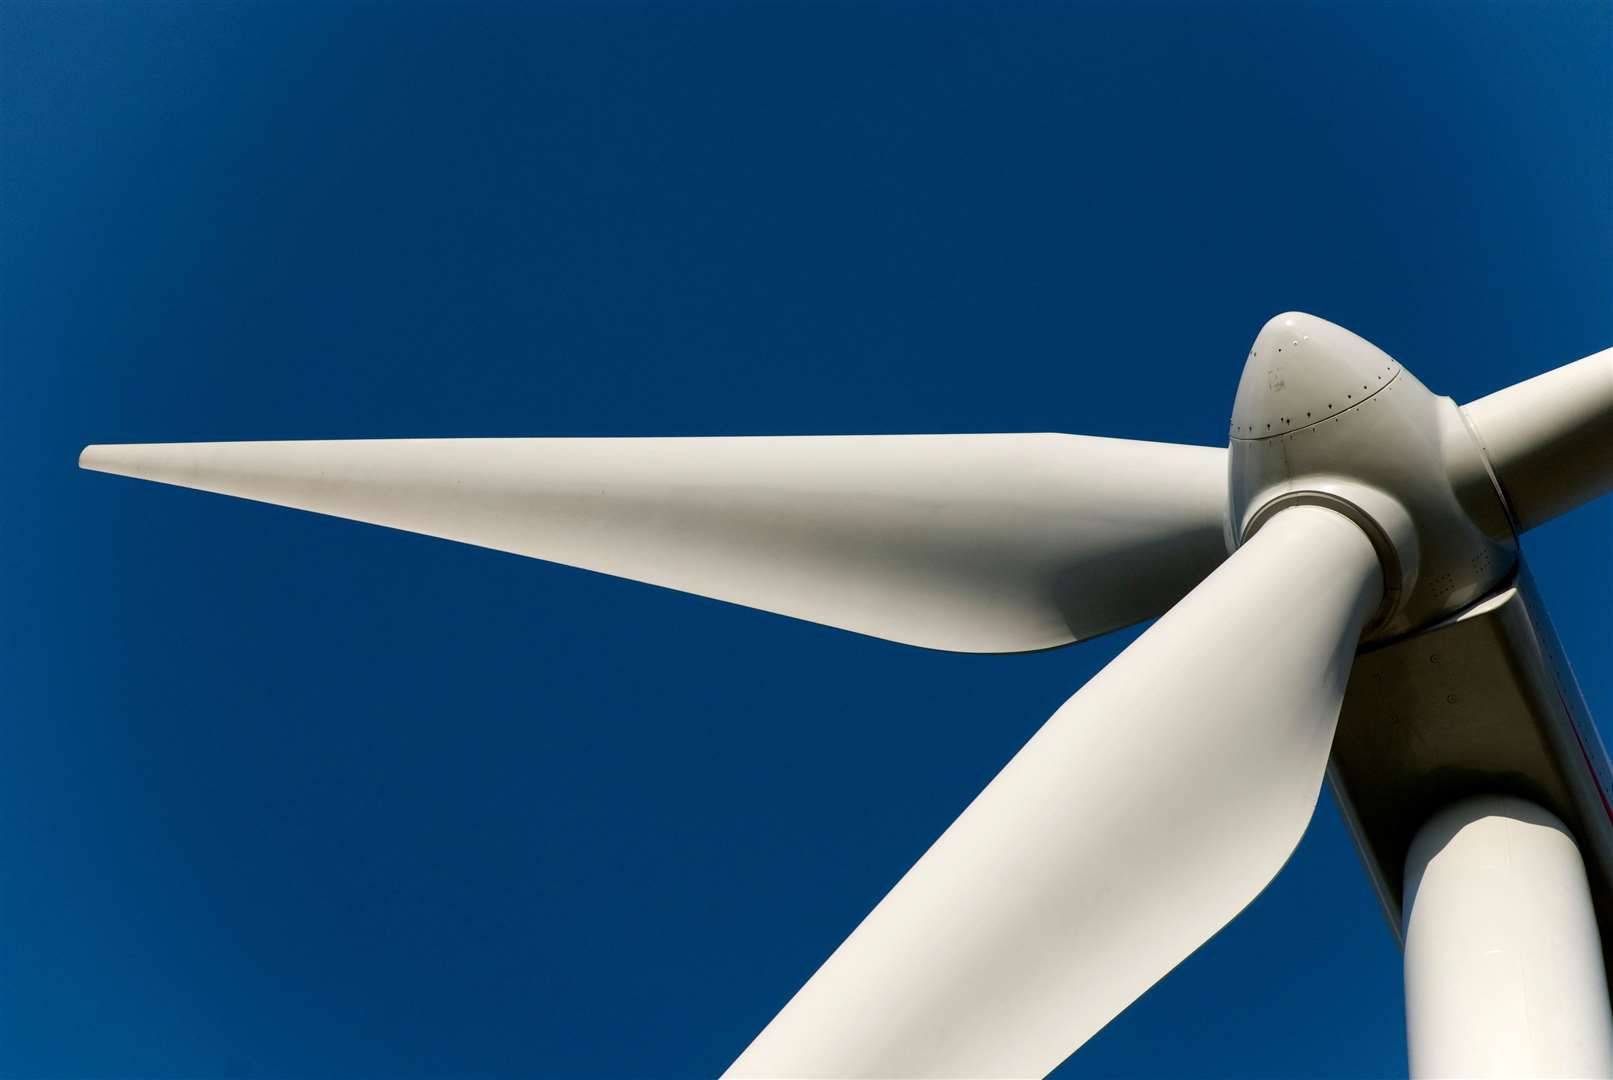 Acheilidh Wind Farm would have 12 with the tallest reaching 230m.